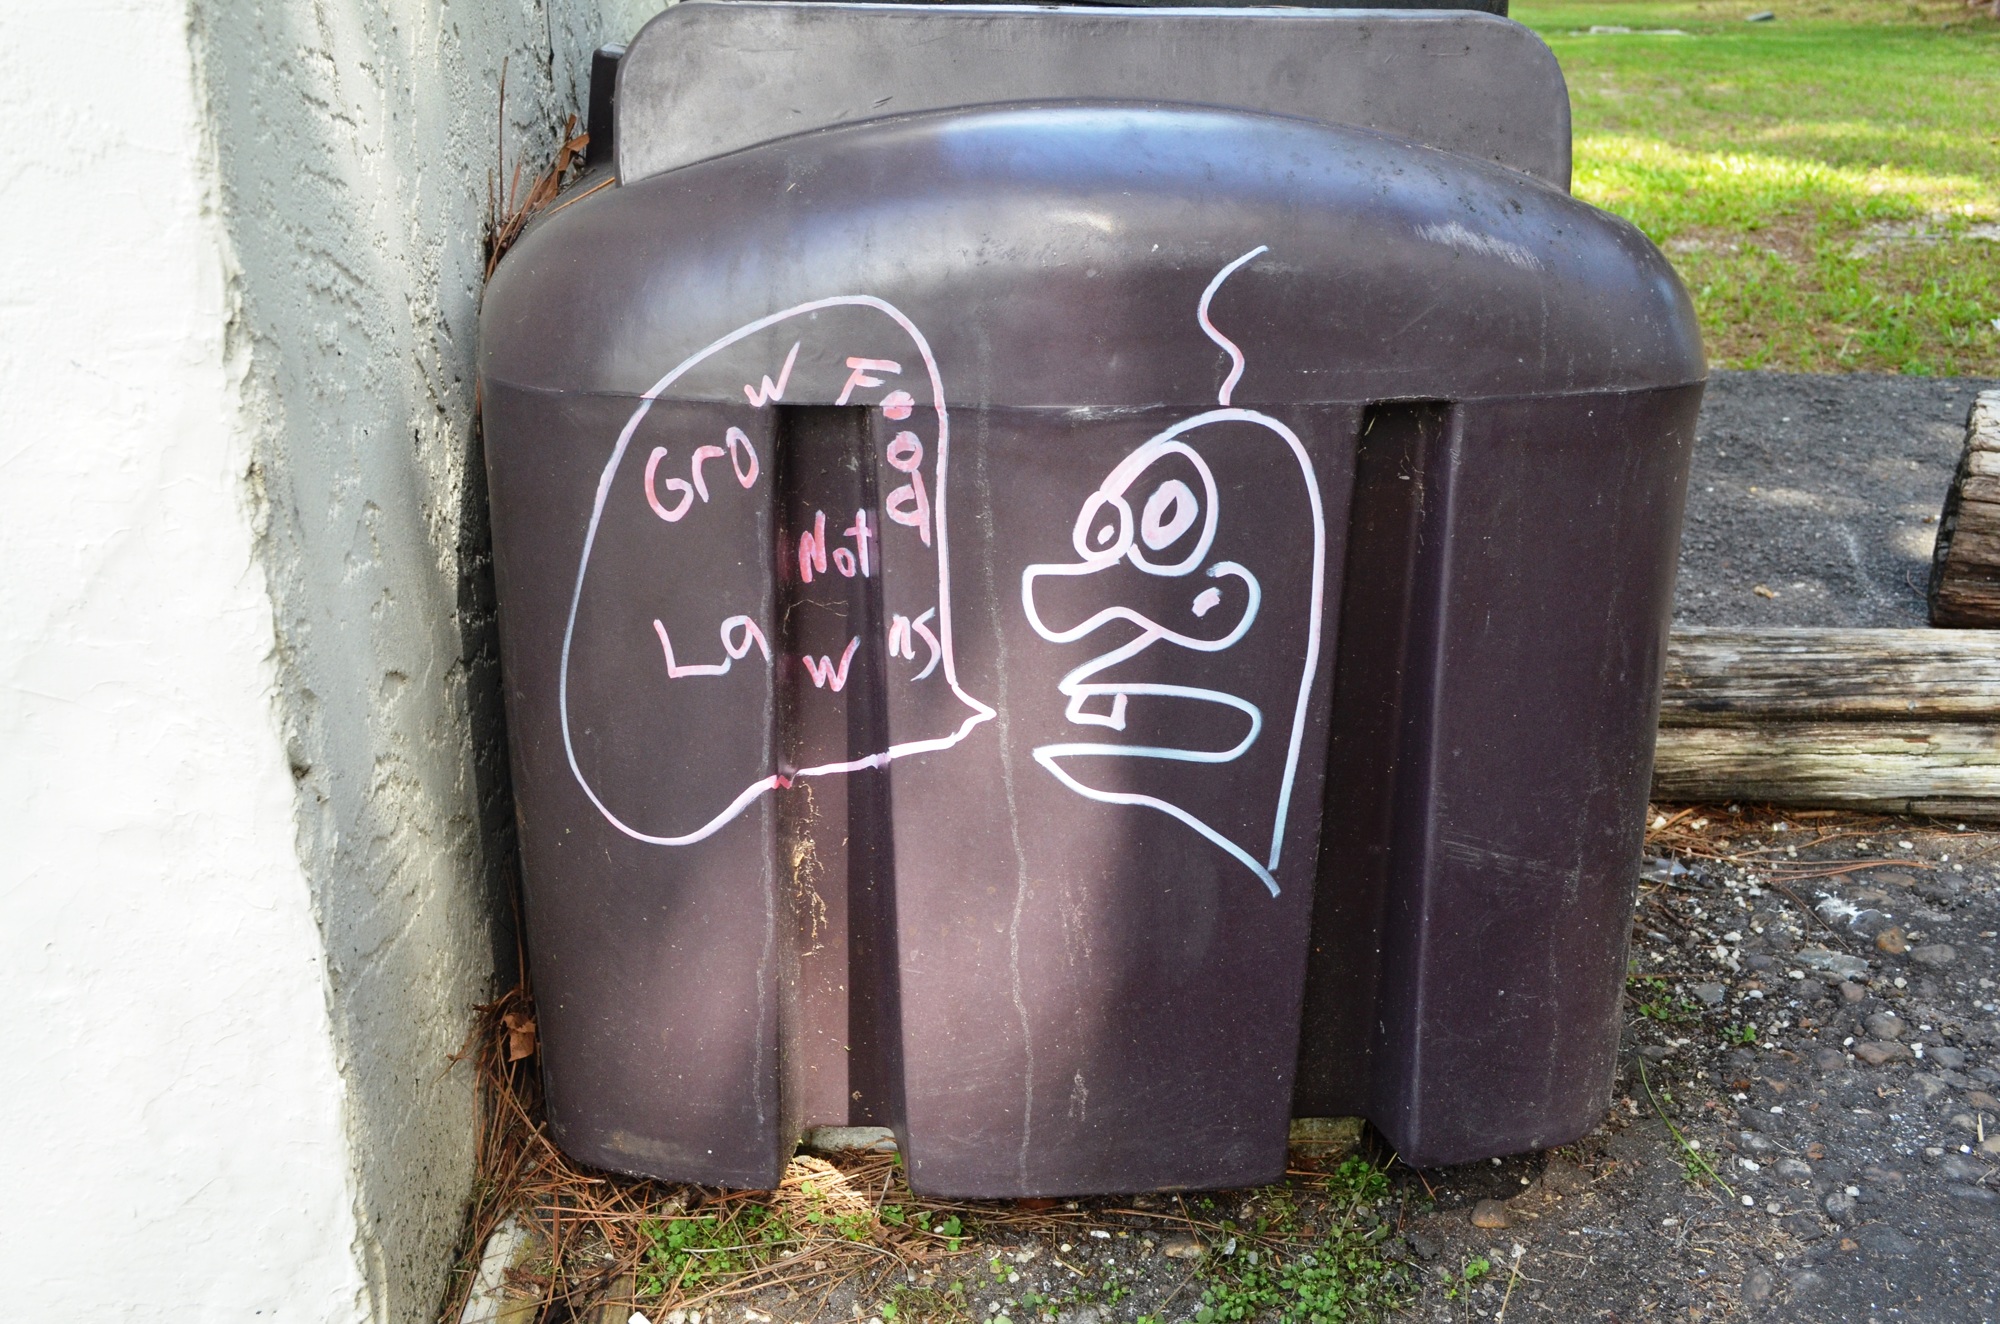 The graffiti on a storage container says “Grow food not lawns.”Photos by Wayne Grant